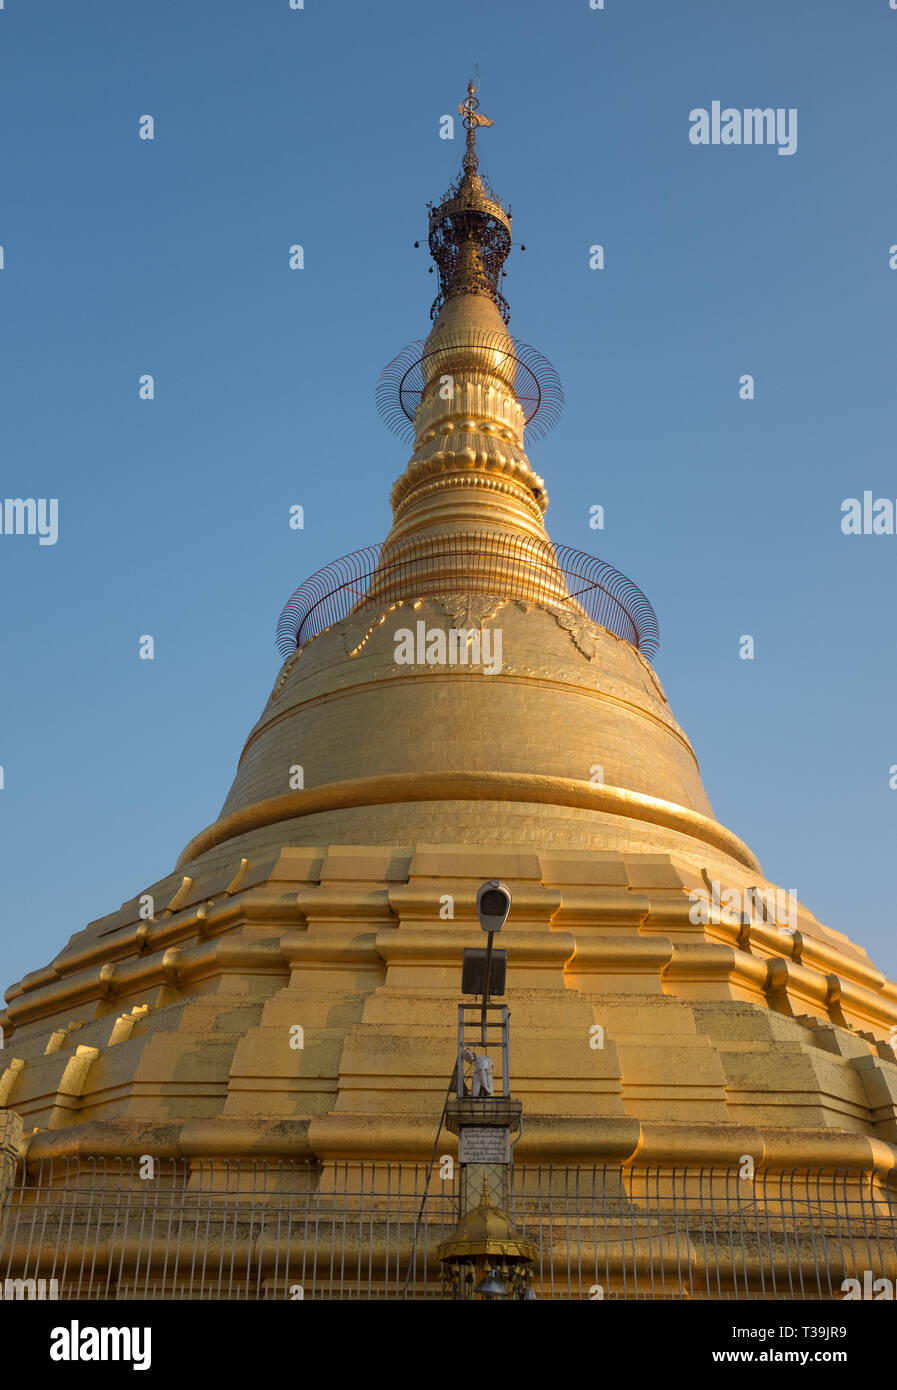 The Botataung Pagoda, the pagoda is hollow within, and houses what is believed to be a sacred hair of Gautama Buddha. Yangon,Myanmar (Burma). Stock Photo